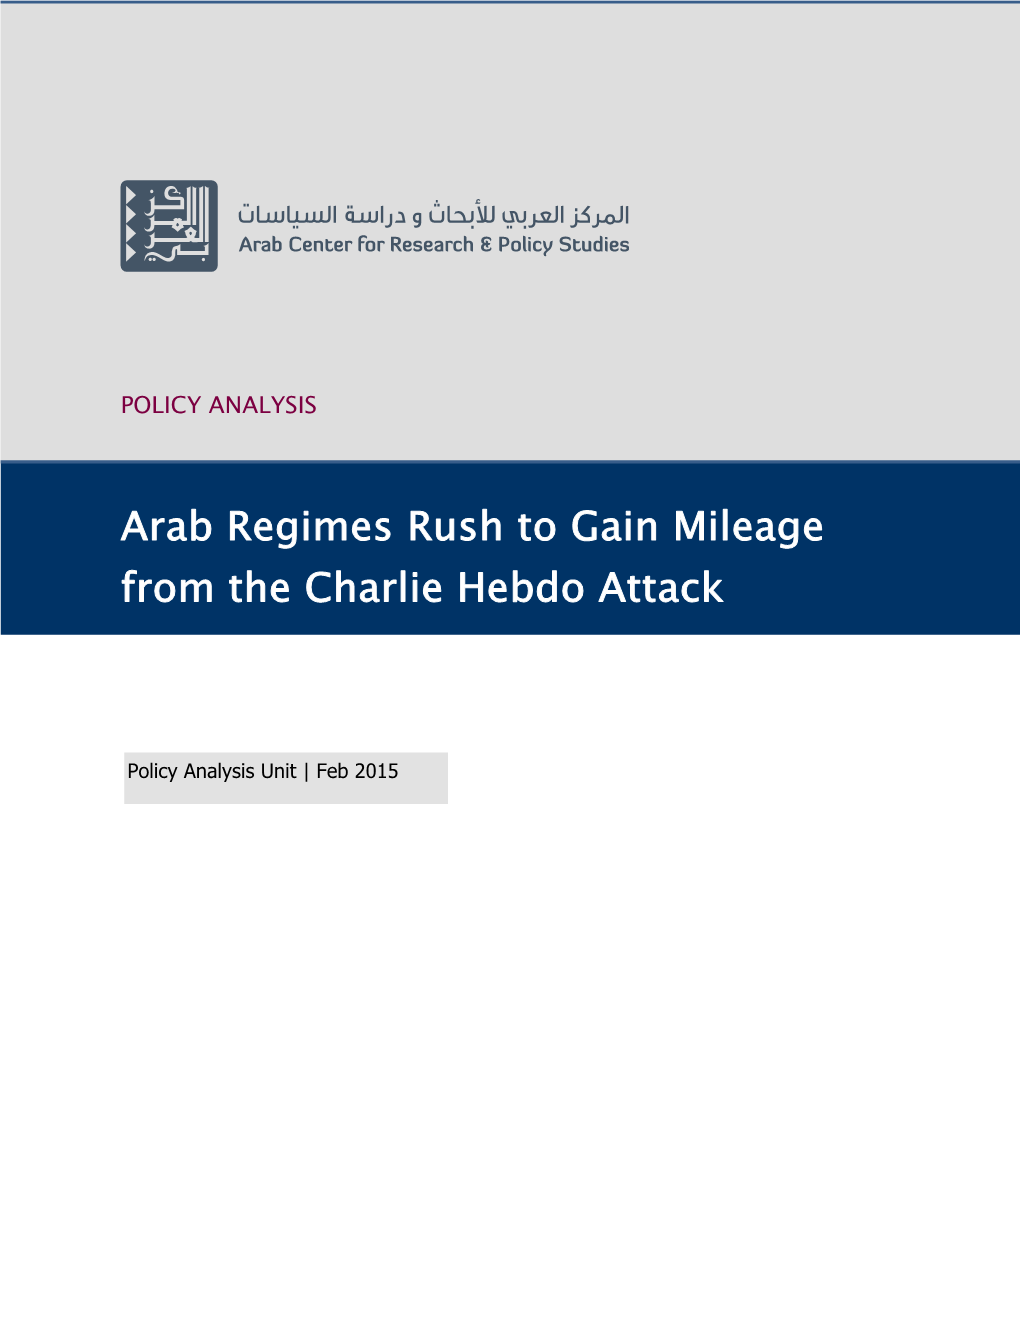 Arab Regimes Rush to Gain Mileage from the Charlie Hebdo Attack